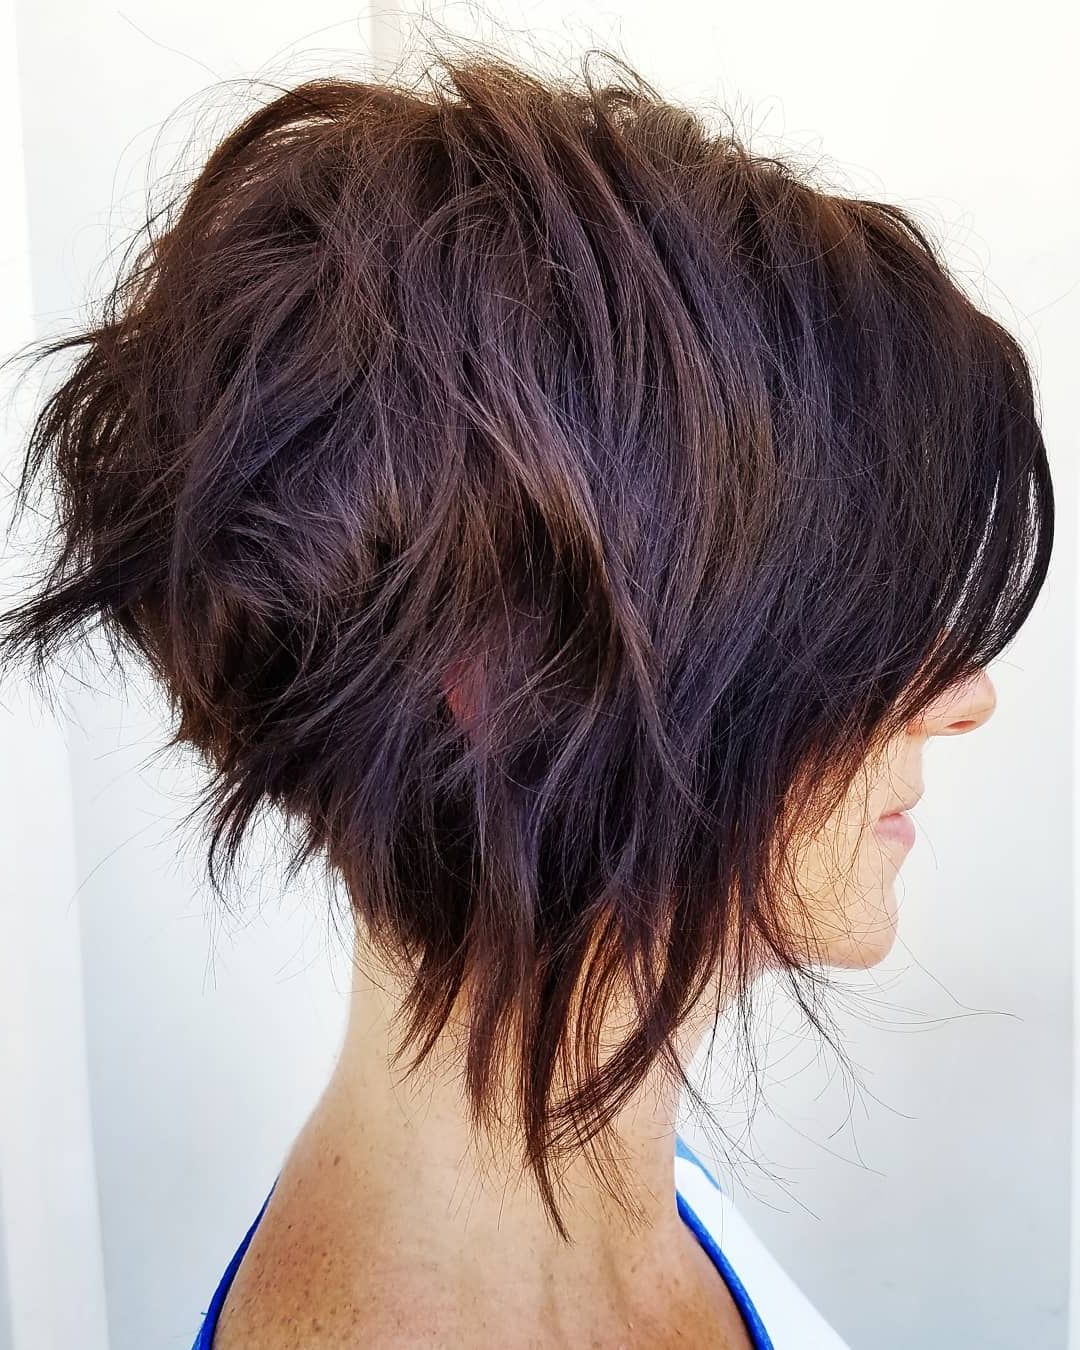 2019 Short Messy Bob Hairstyles With 10 Trendy Messy Bob Hairstyles And Haircuts, 2019 Female Short Hair (View 4 of 20)